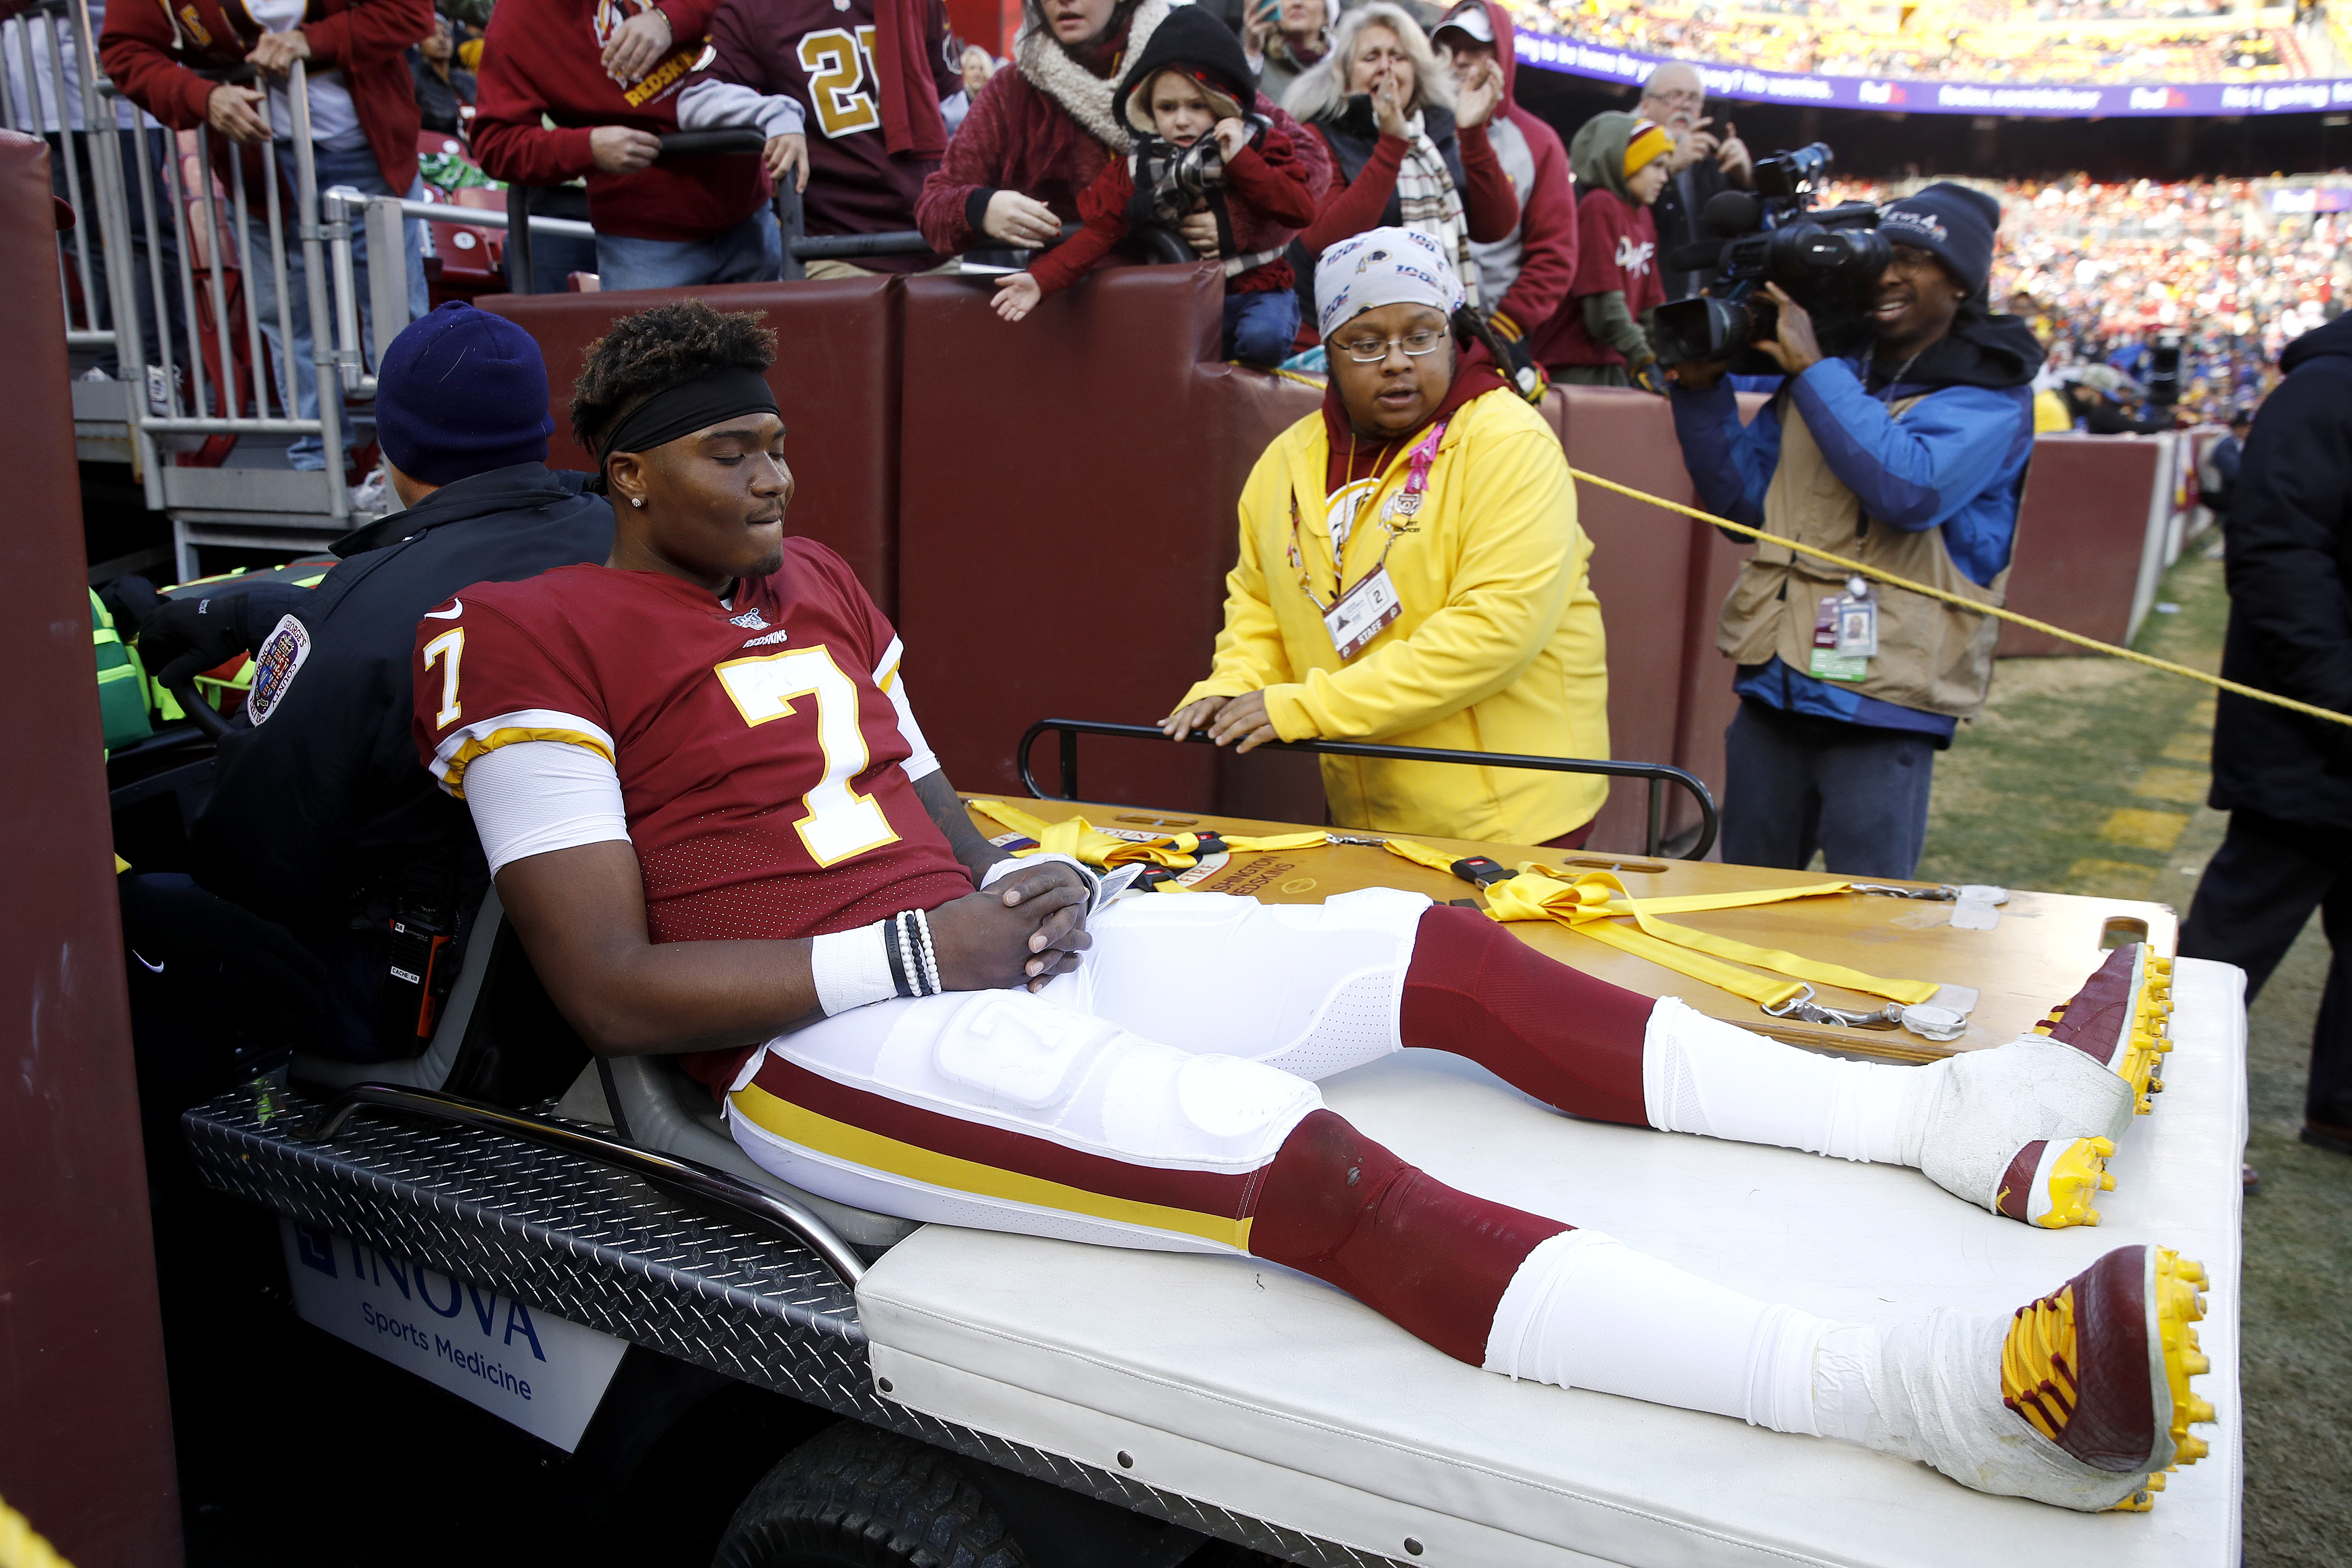 QB Dwayne Haskins injures ankle in Redskins' loss to Giants